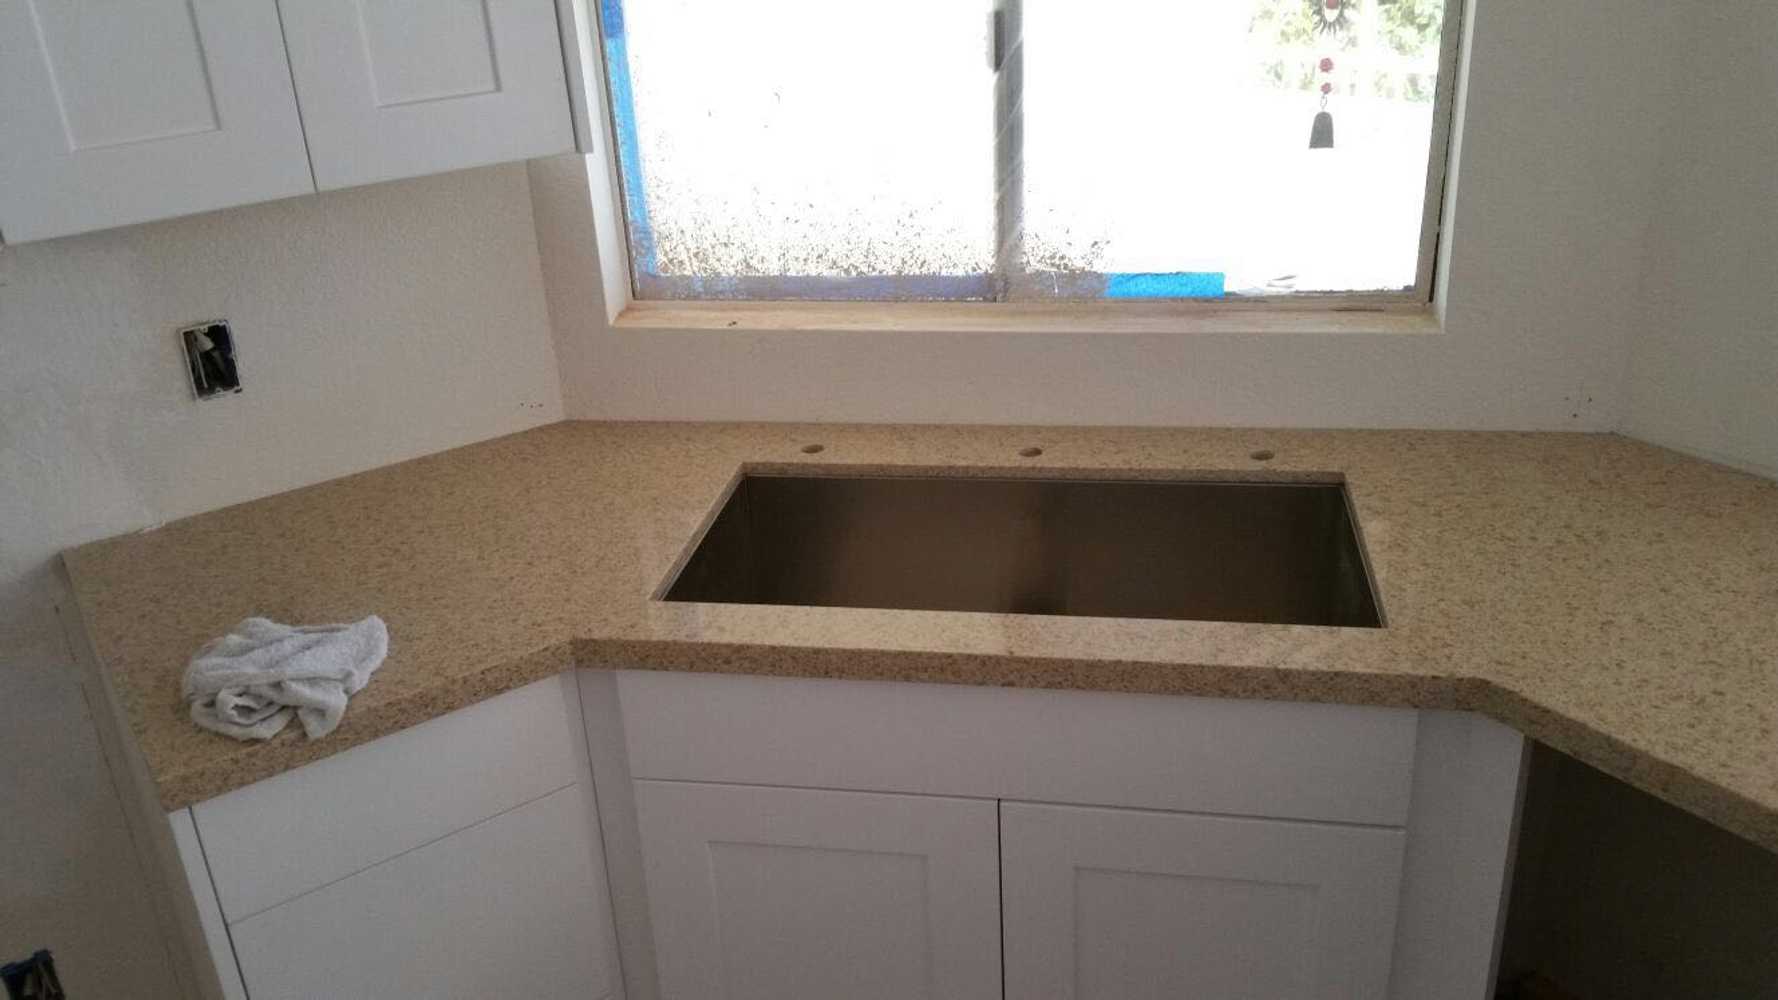 Kitchen Remodel Project